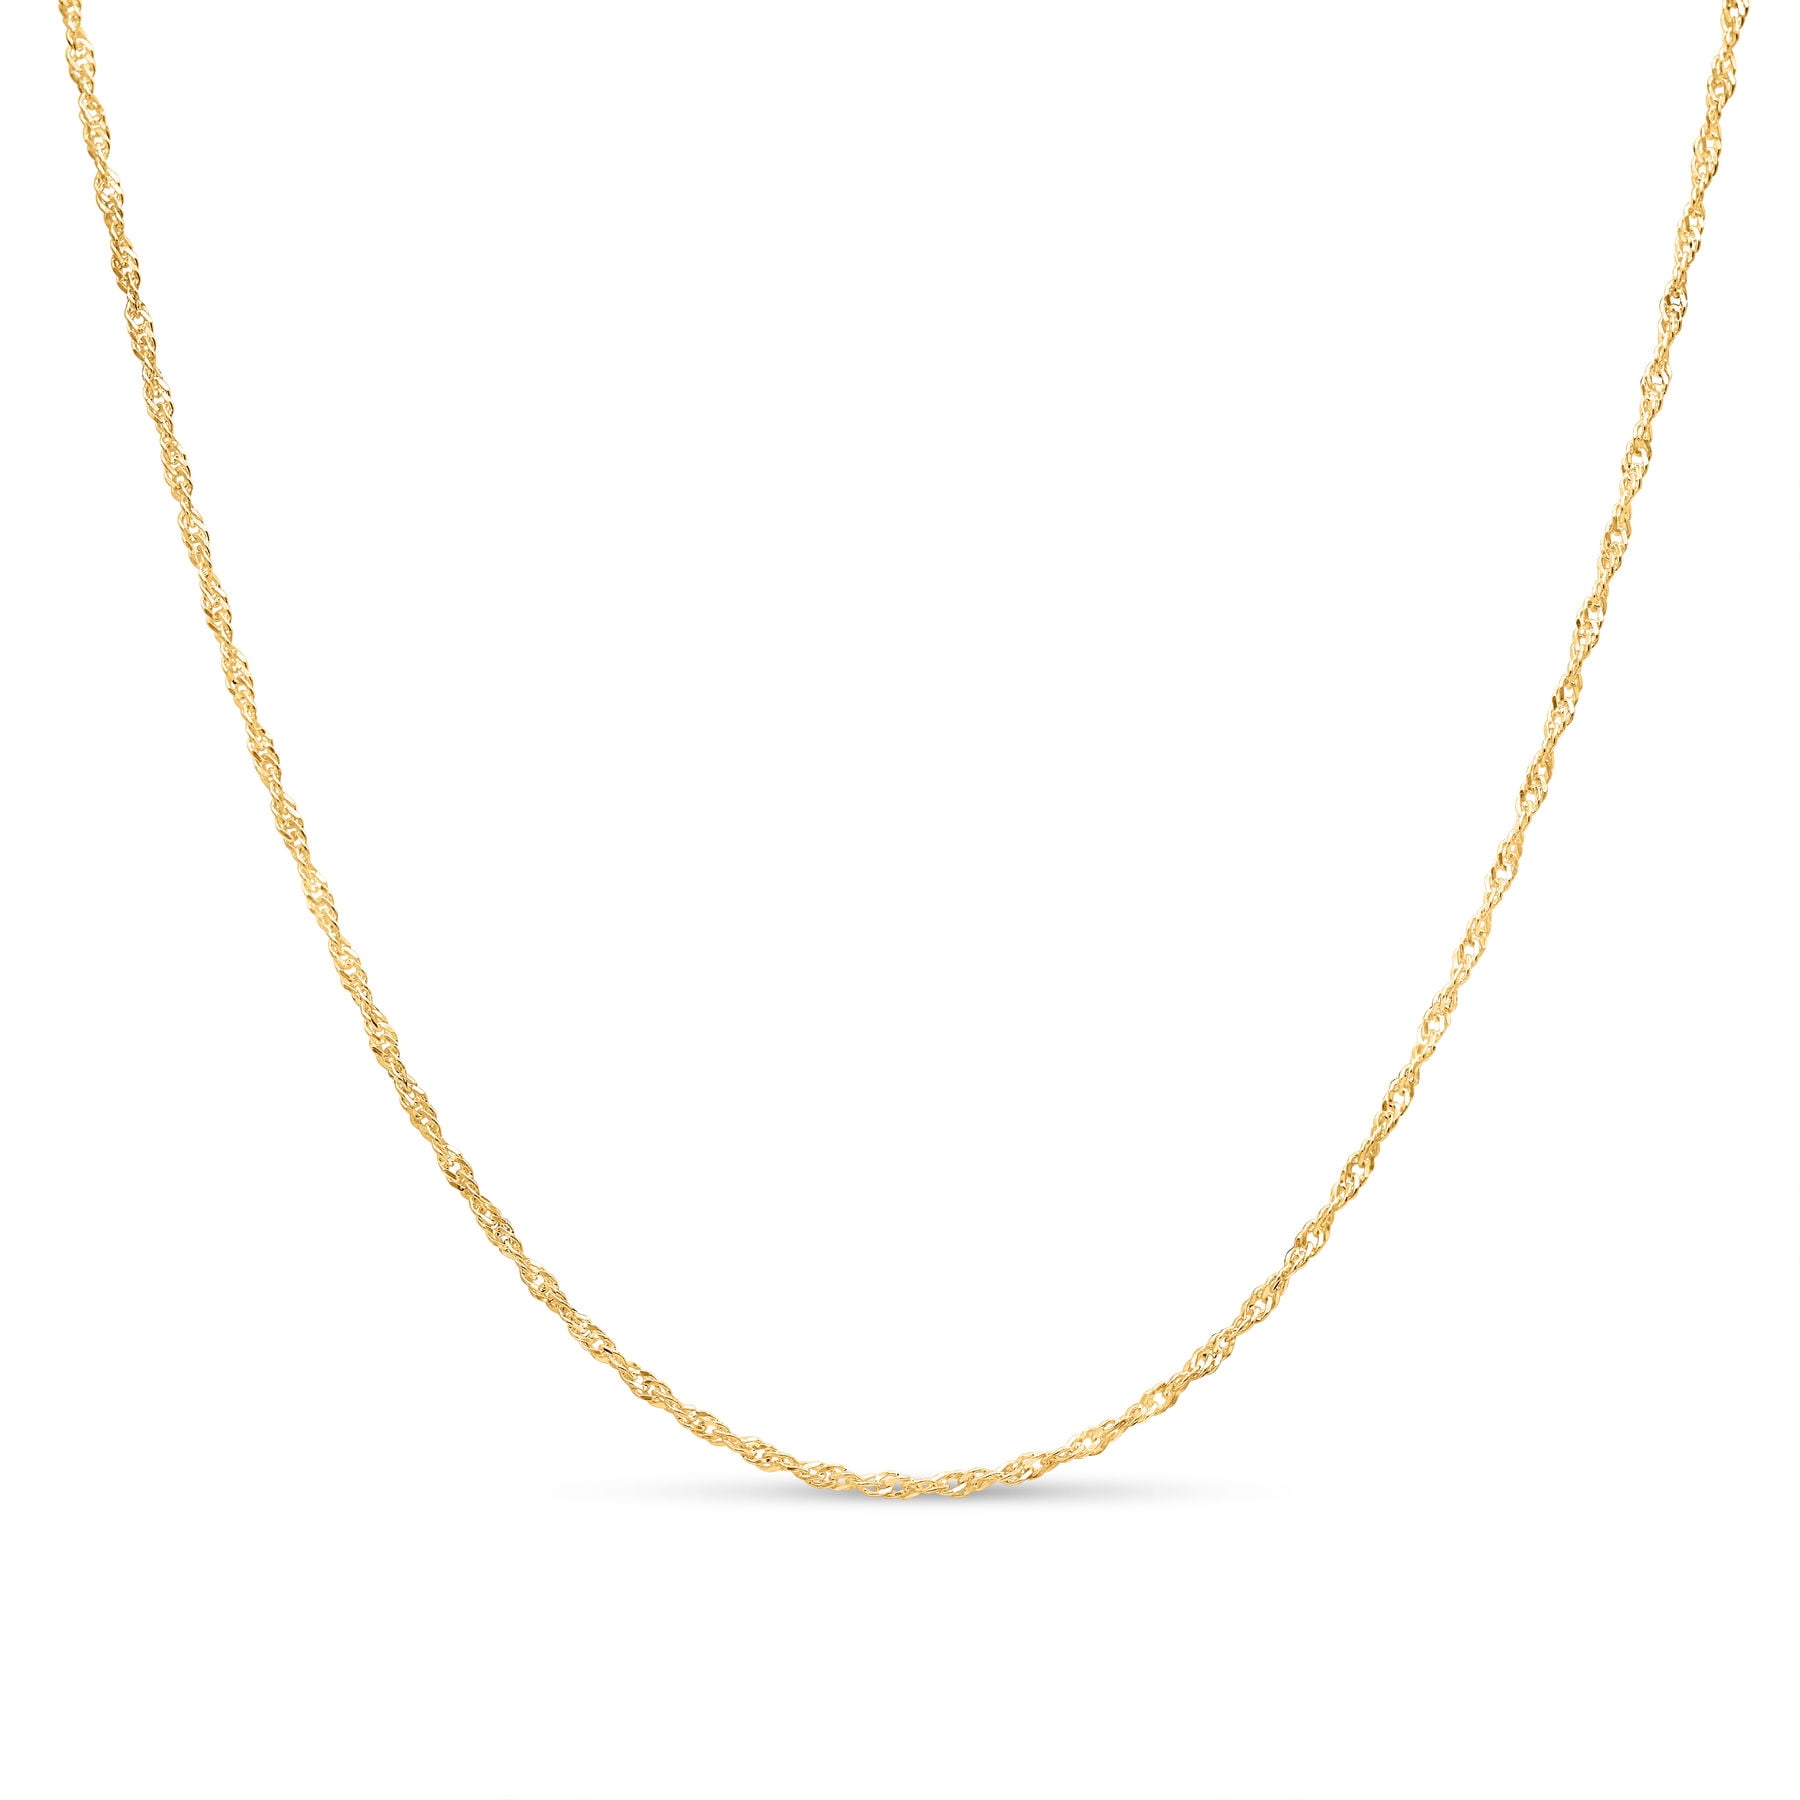 Women Men Gold Plated Sterling Silver 2mm Singapore Twisted Curb Chain Necklace